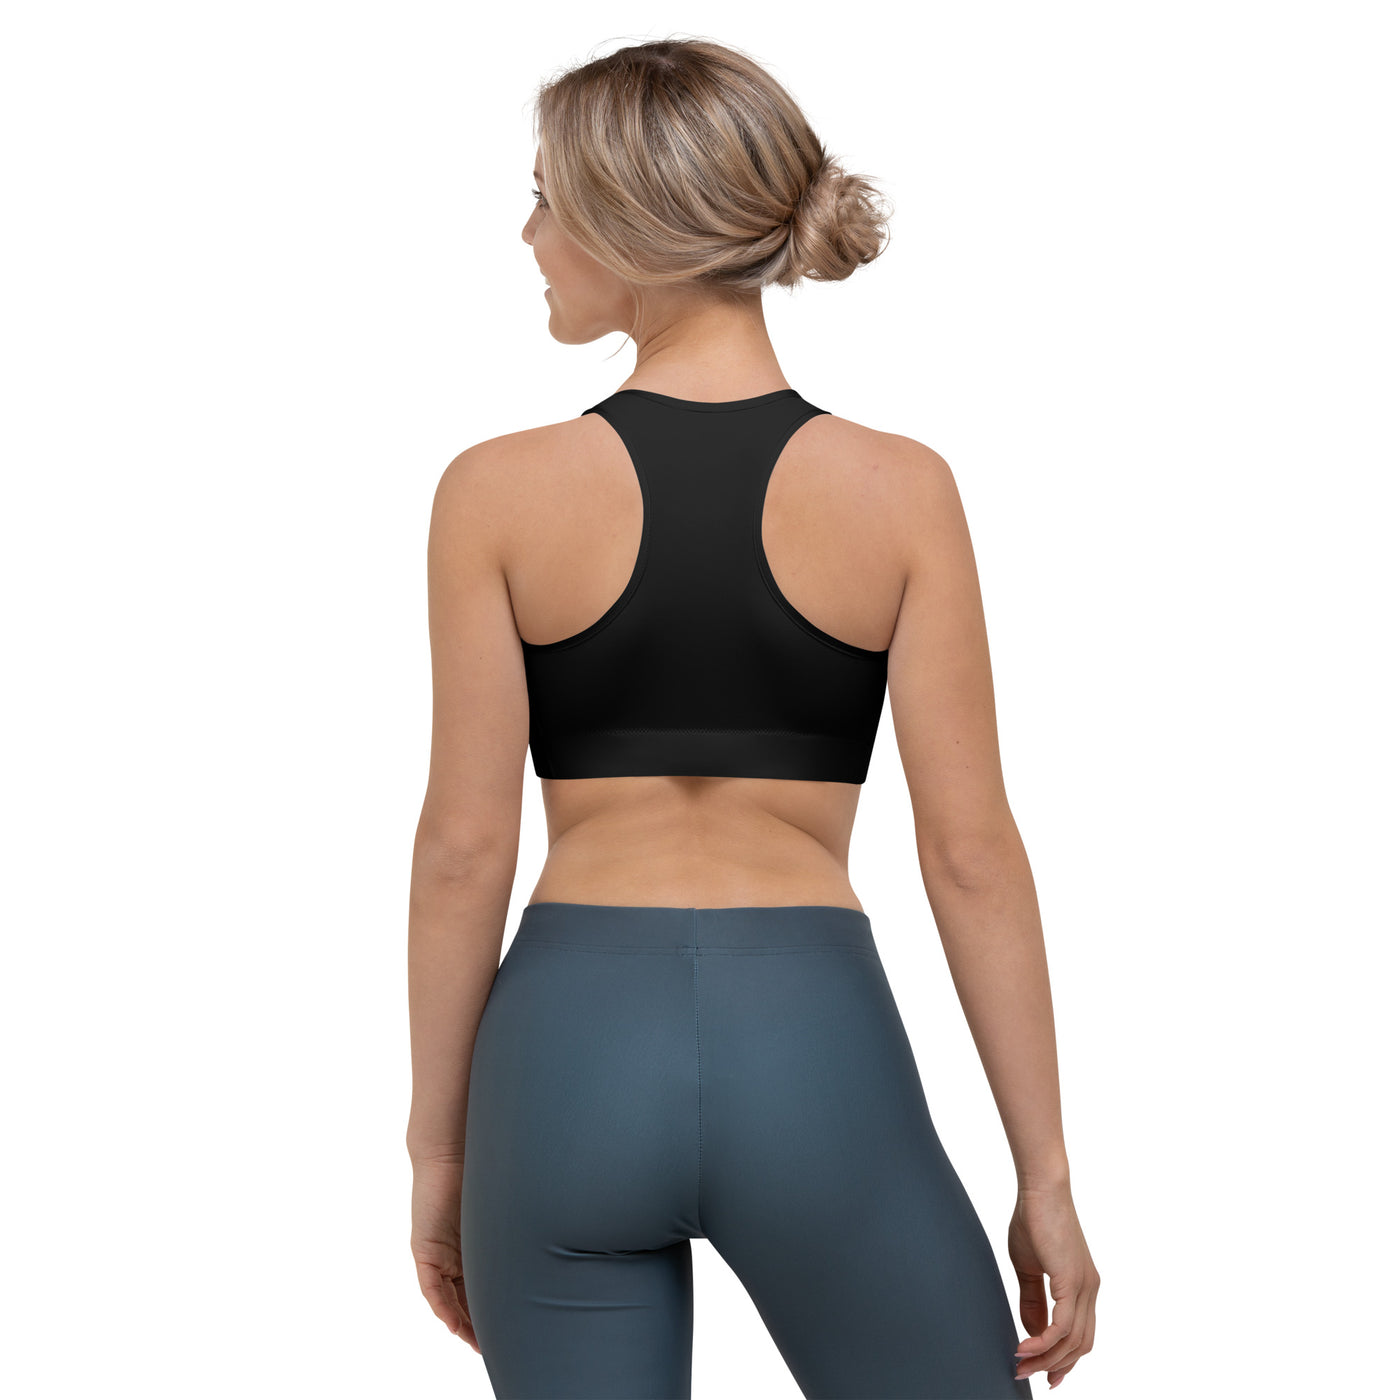 Women's Sports Bra | Sports Bra for Women | Faith and Happiness Store